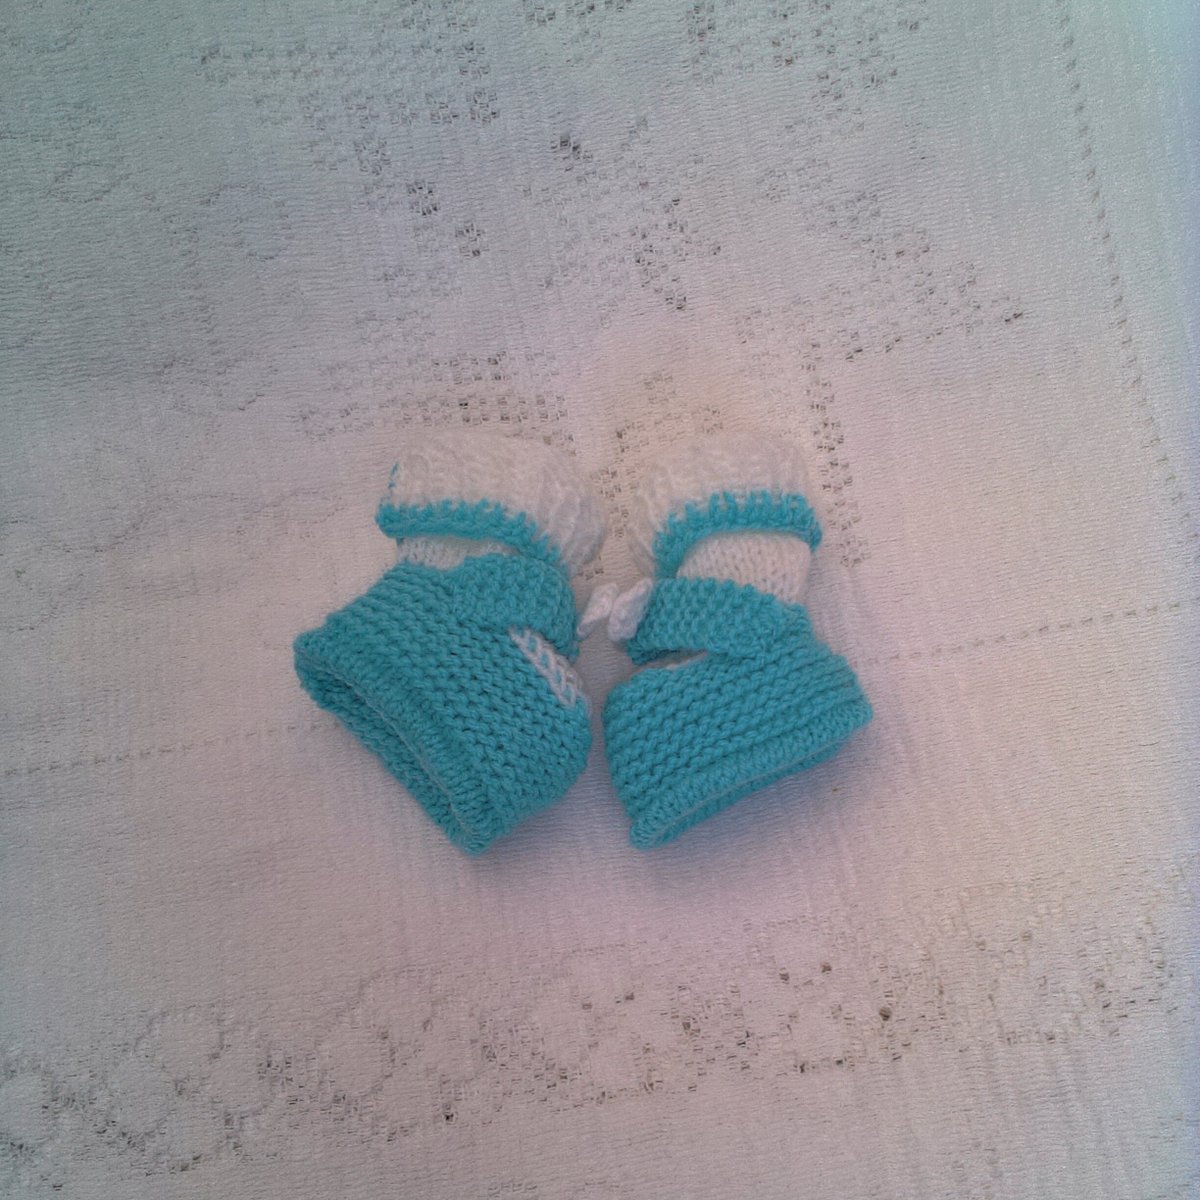 These Mint & White Shoe & Sock Booties for 0 - 6 month old would make a great gift idea for a new baby girl. They can be custom made in any colour. £8 + P&P. folksy.com/items/8319149-… #newonfolksy #creationsfortinytots #babysbooties #shoeandsockbooties #babyshowergift #newbabygift